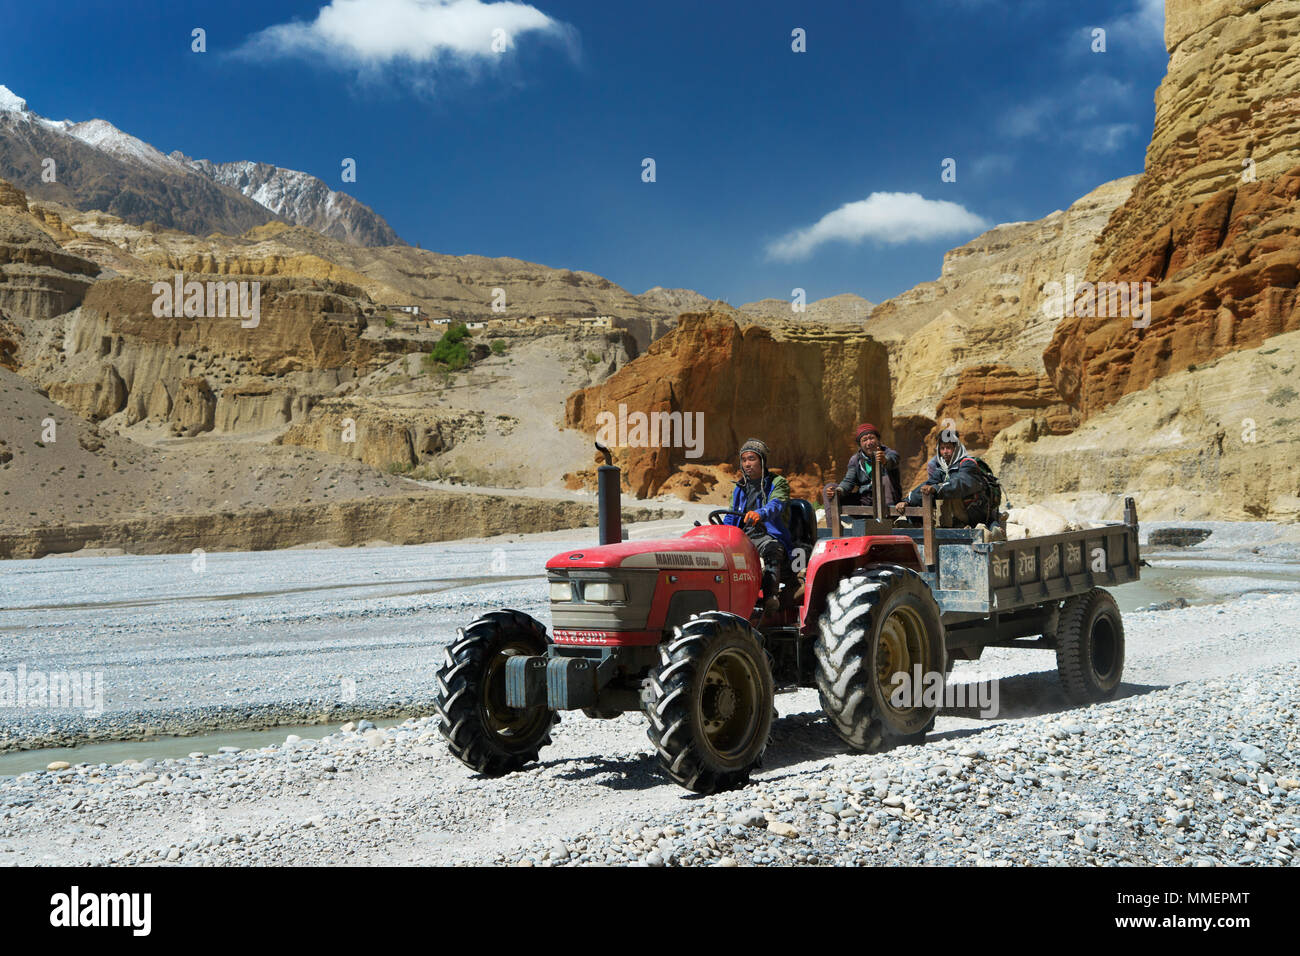 Loba workers travelling on a tractor along the dry river bed of the Kali Gandaki river near Chele, Upper Mustang region, Nepal. Stock Photo